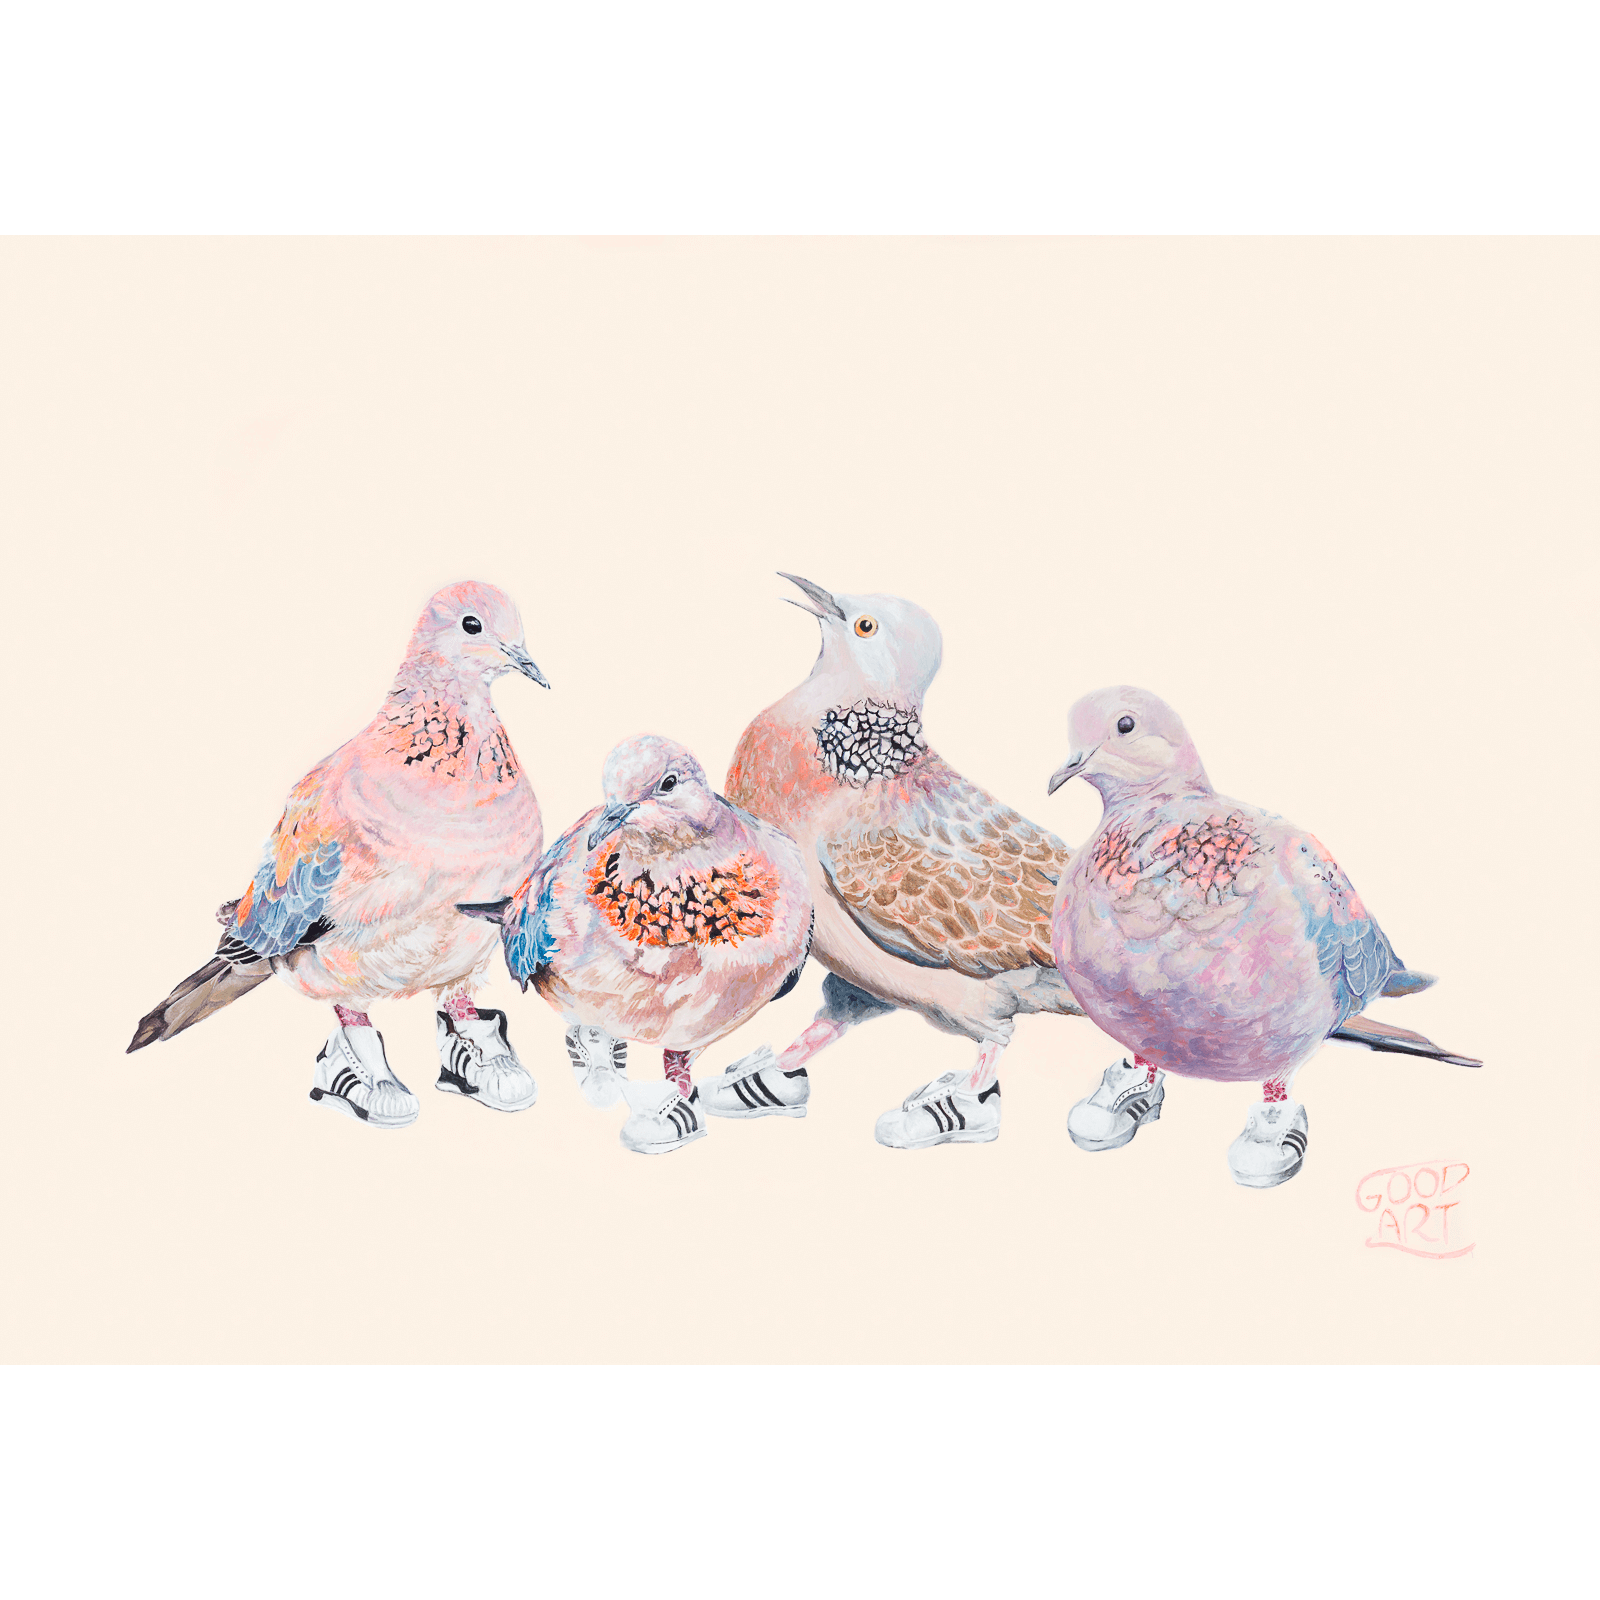 An artwork of Laughing and Spotted Doves. Four birds in total wearing Run DMC adidas sneakers. An Australian bird Art print for a boy or girls bedroom. Painted by Good Art.